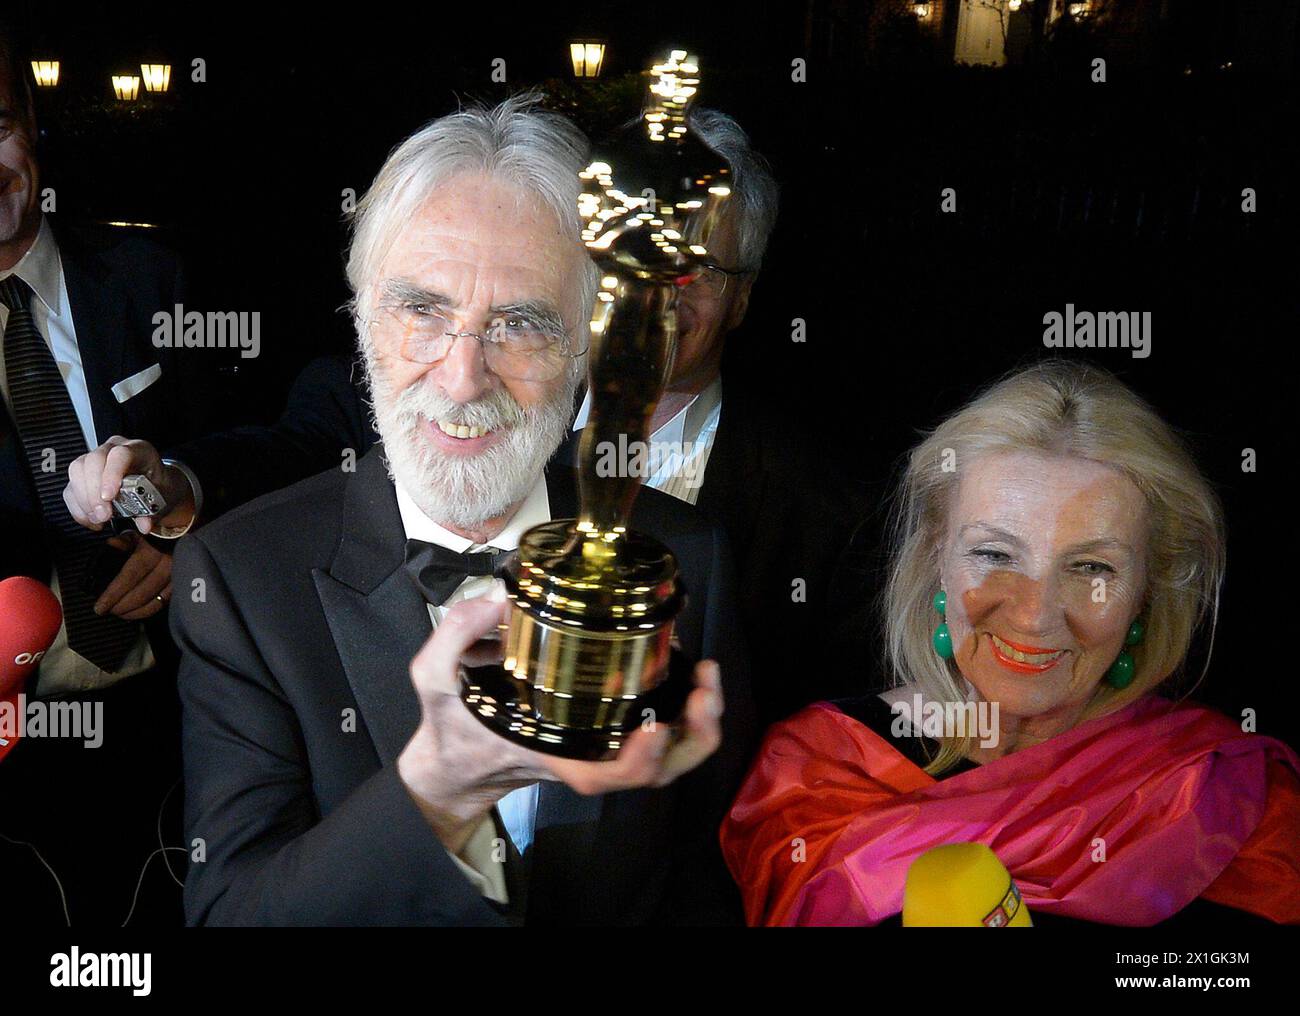 Austrian director Michael Haneke received an Oscar for Best Foreign Language Film of the Year for 'Amour' during the 85th Academy Awards at the Dolby Theatre in Hollywood, California, USA, 24 February 2013.    PICTURE: Michael Haneke and his wife Susanne. - 20130225 PD0263 - Rechteinfo: Rights Managed (RM) Stock Photo